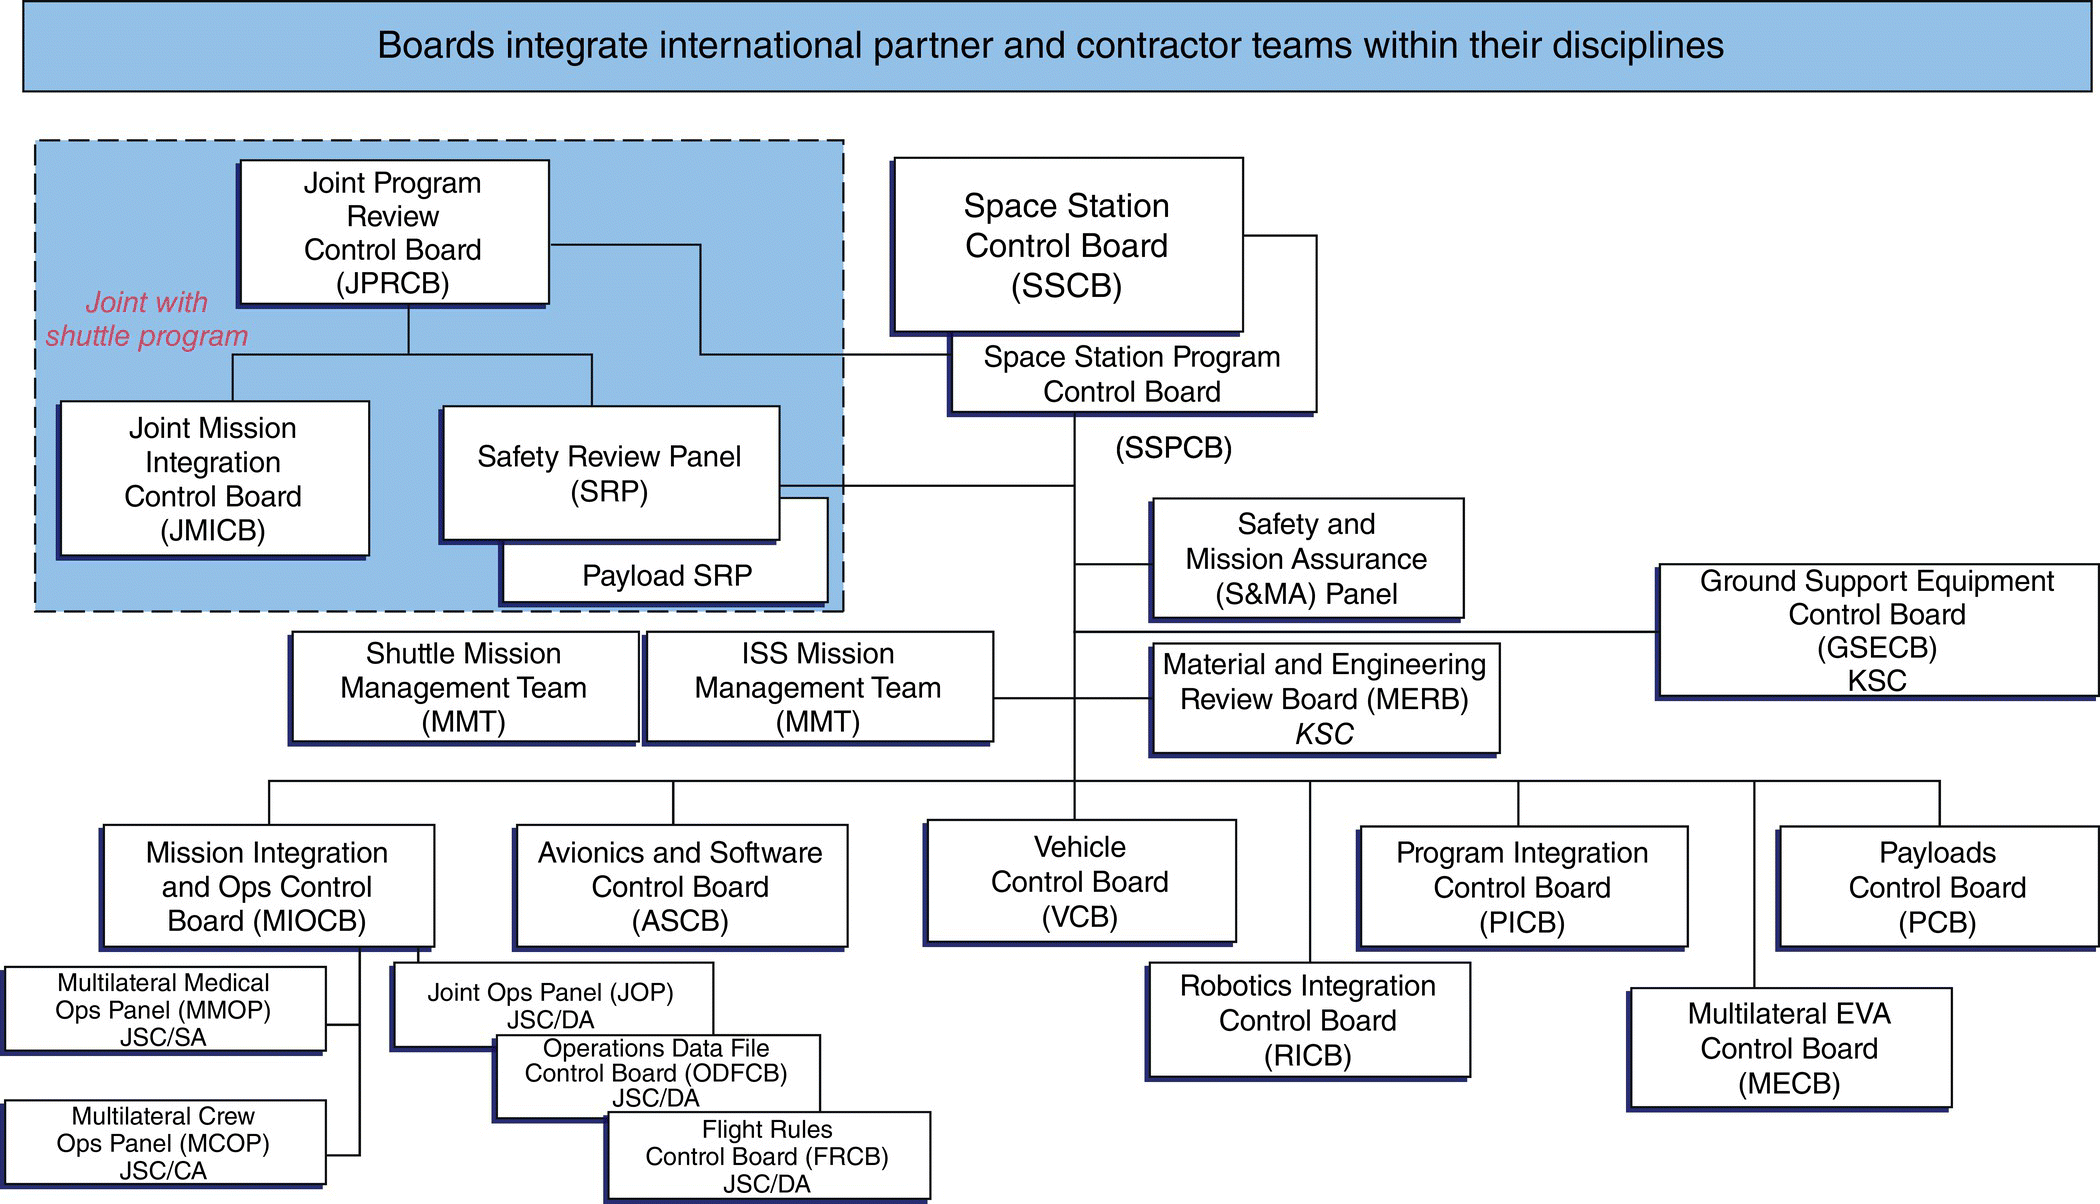 Schematic illustration of high-level board integration of the International Space Station program.